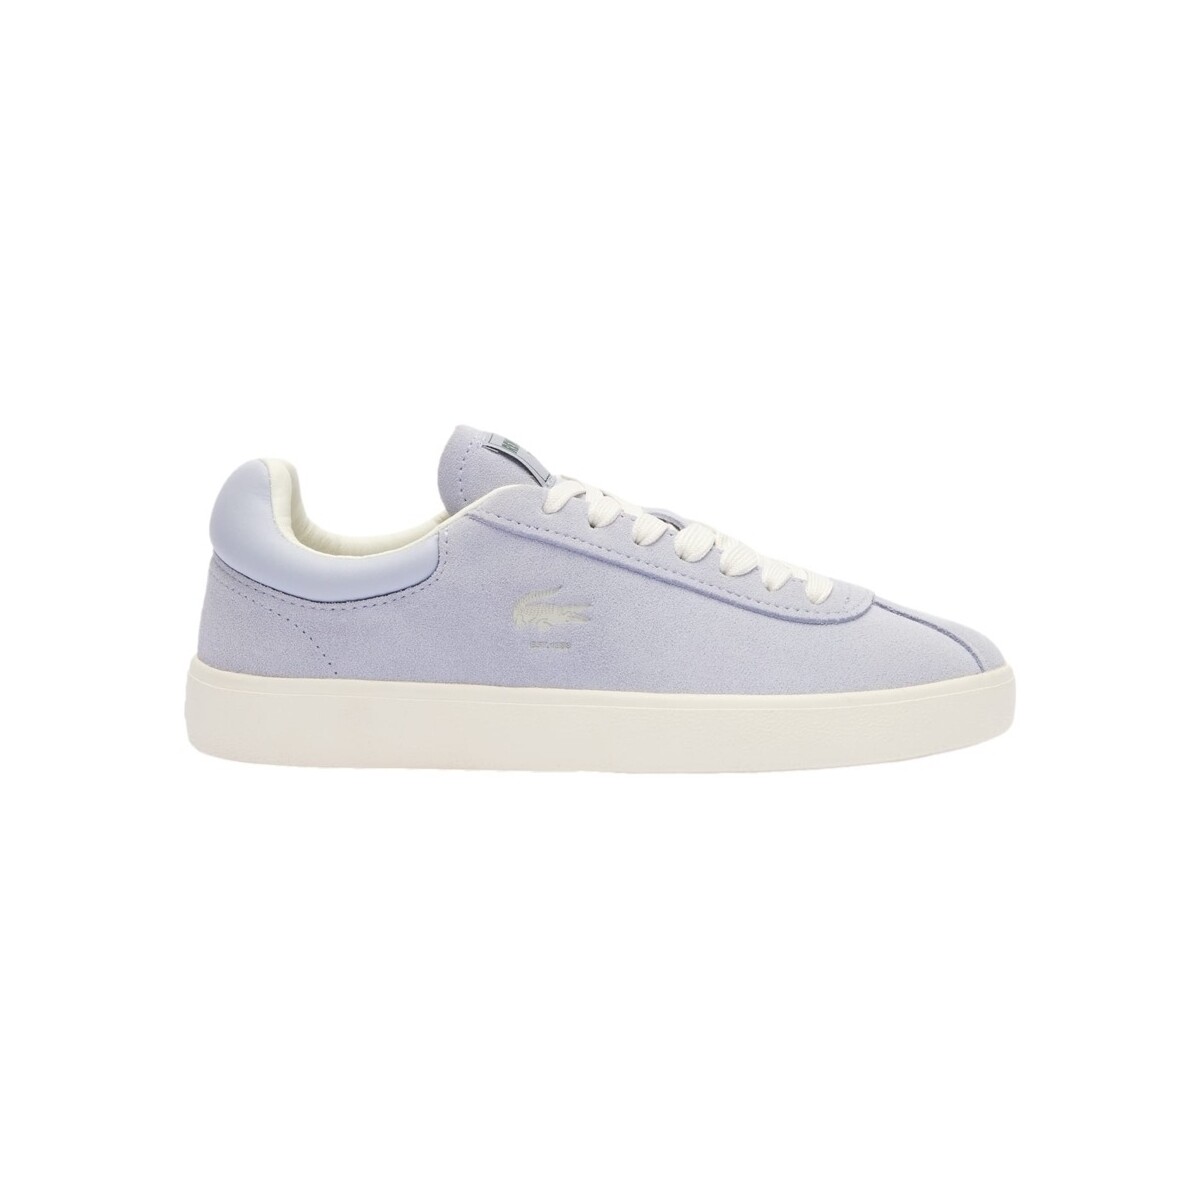 Sneakers Lacoste Baseshot 124 2 SFA – Lt Blue/Off White